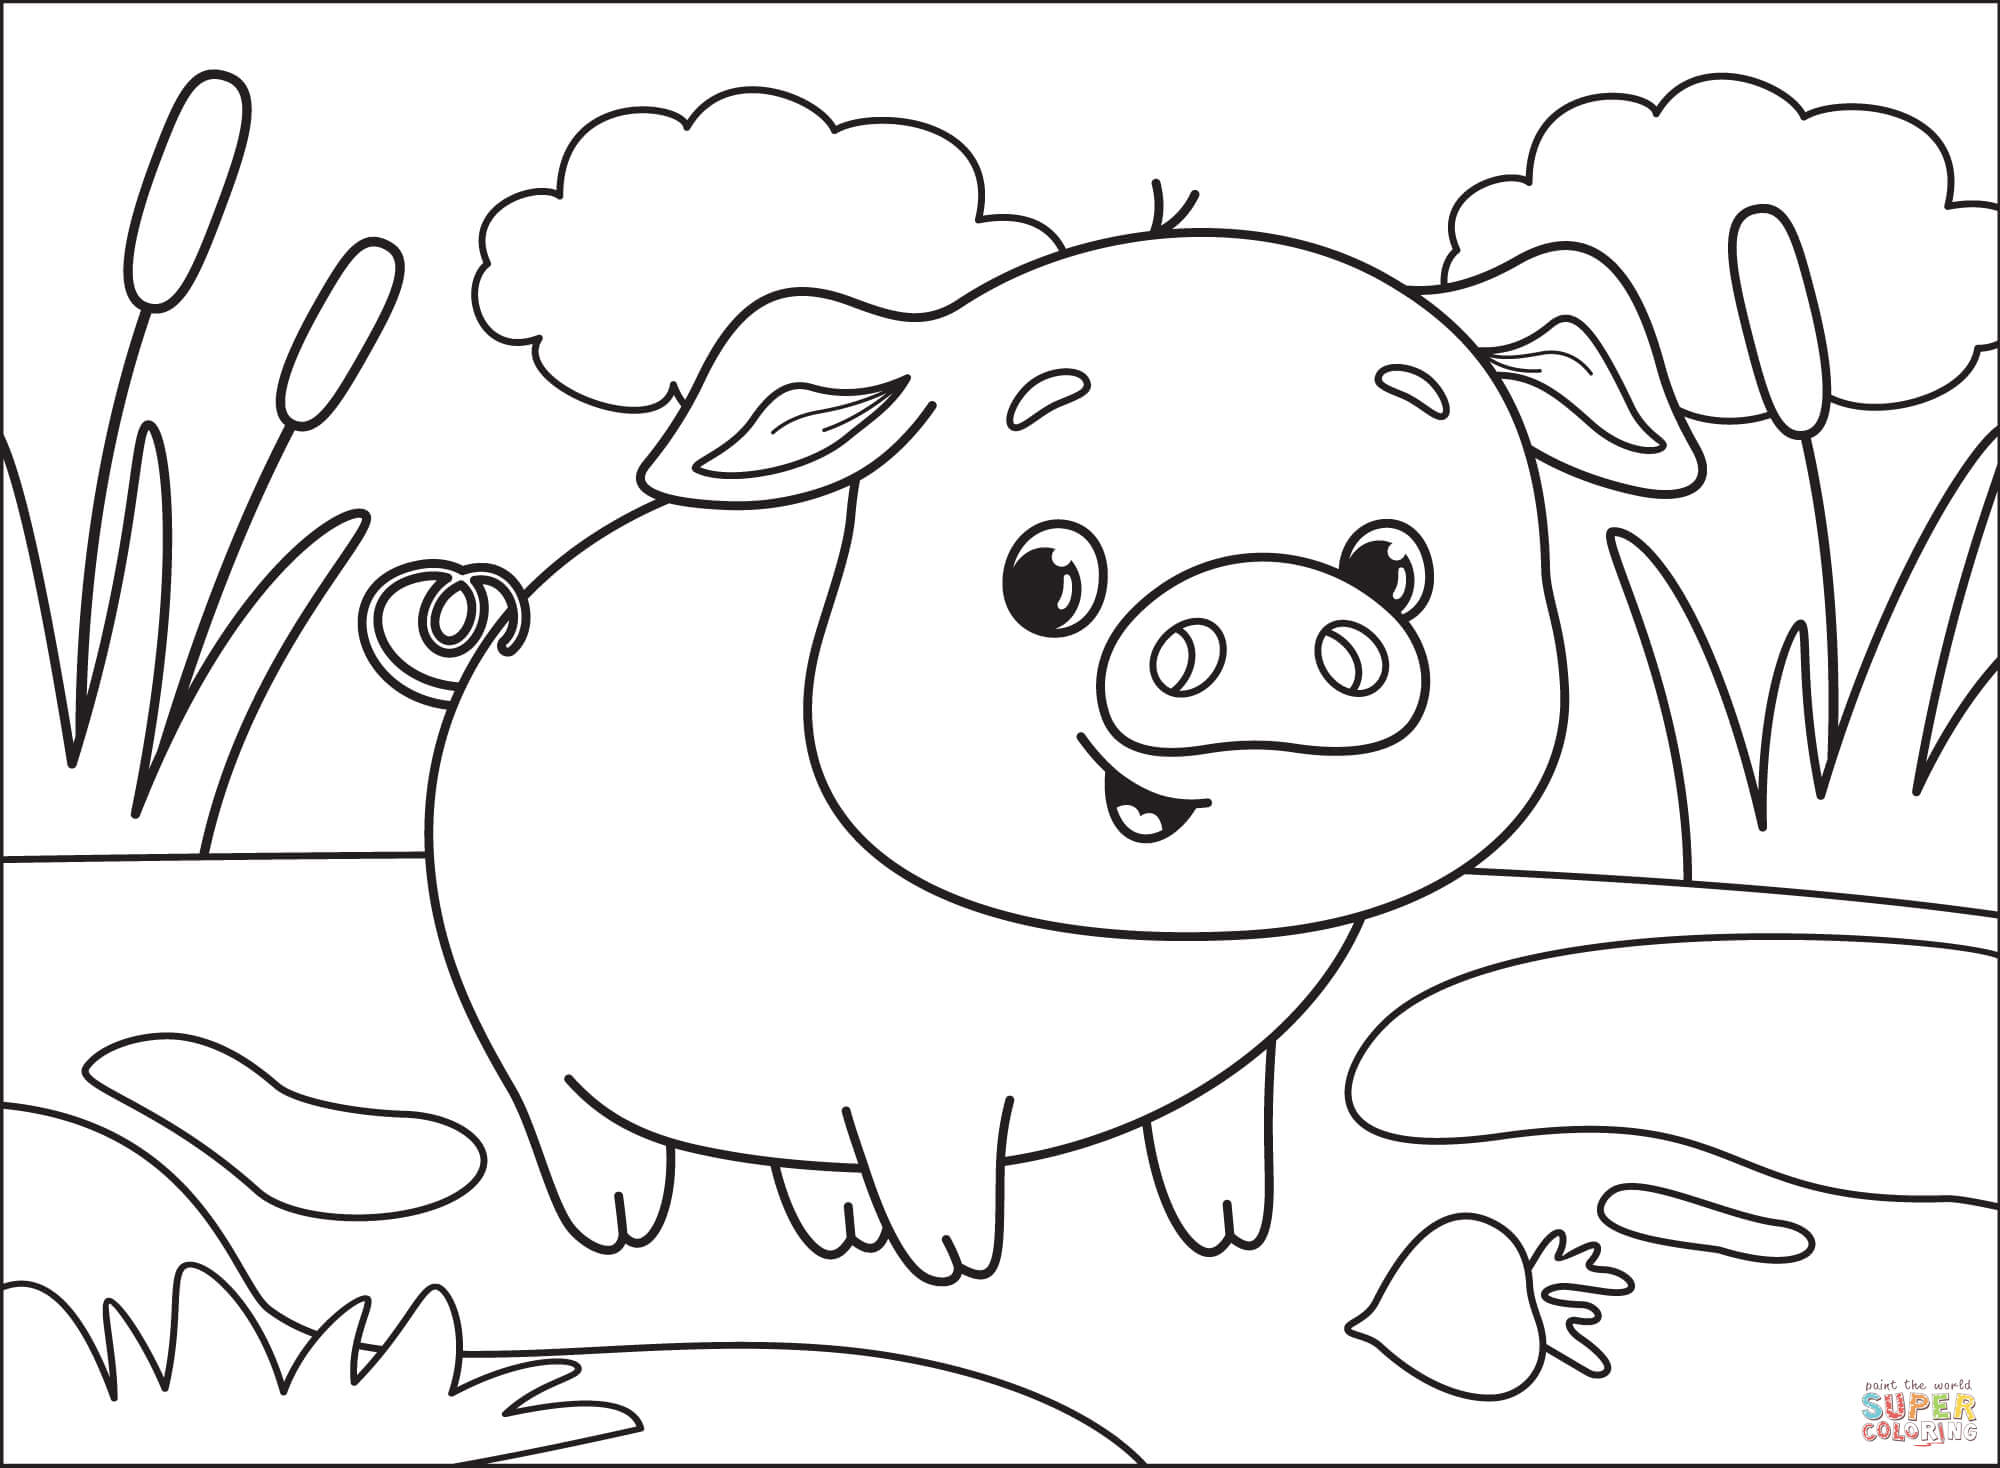 Pig coloring page free printable coloring pages